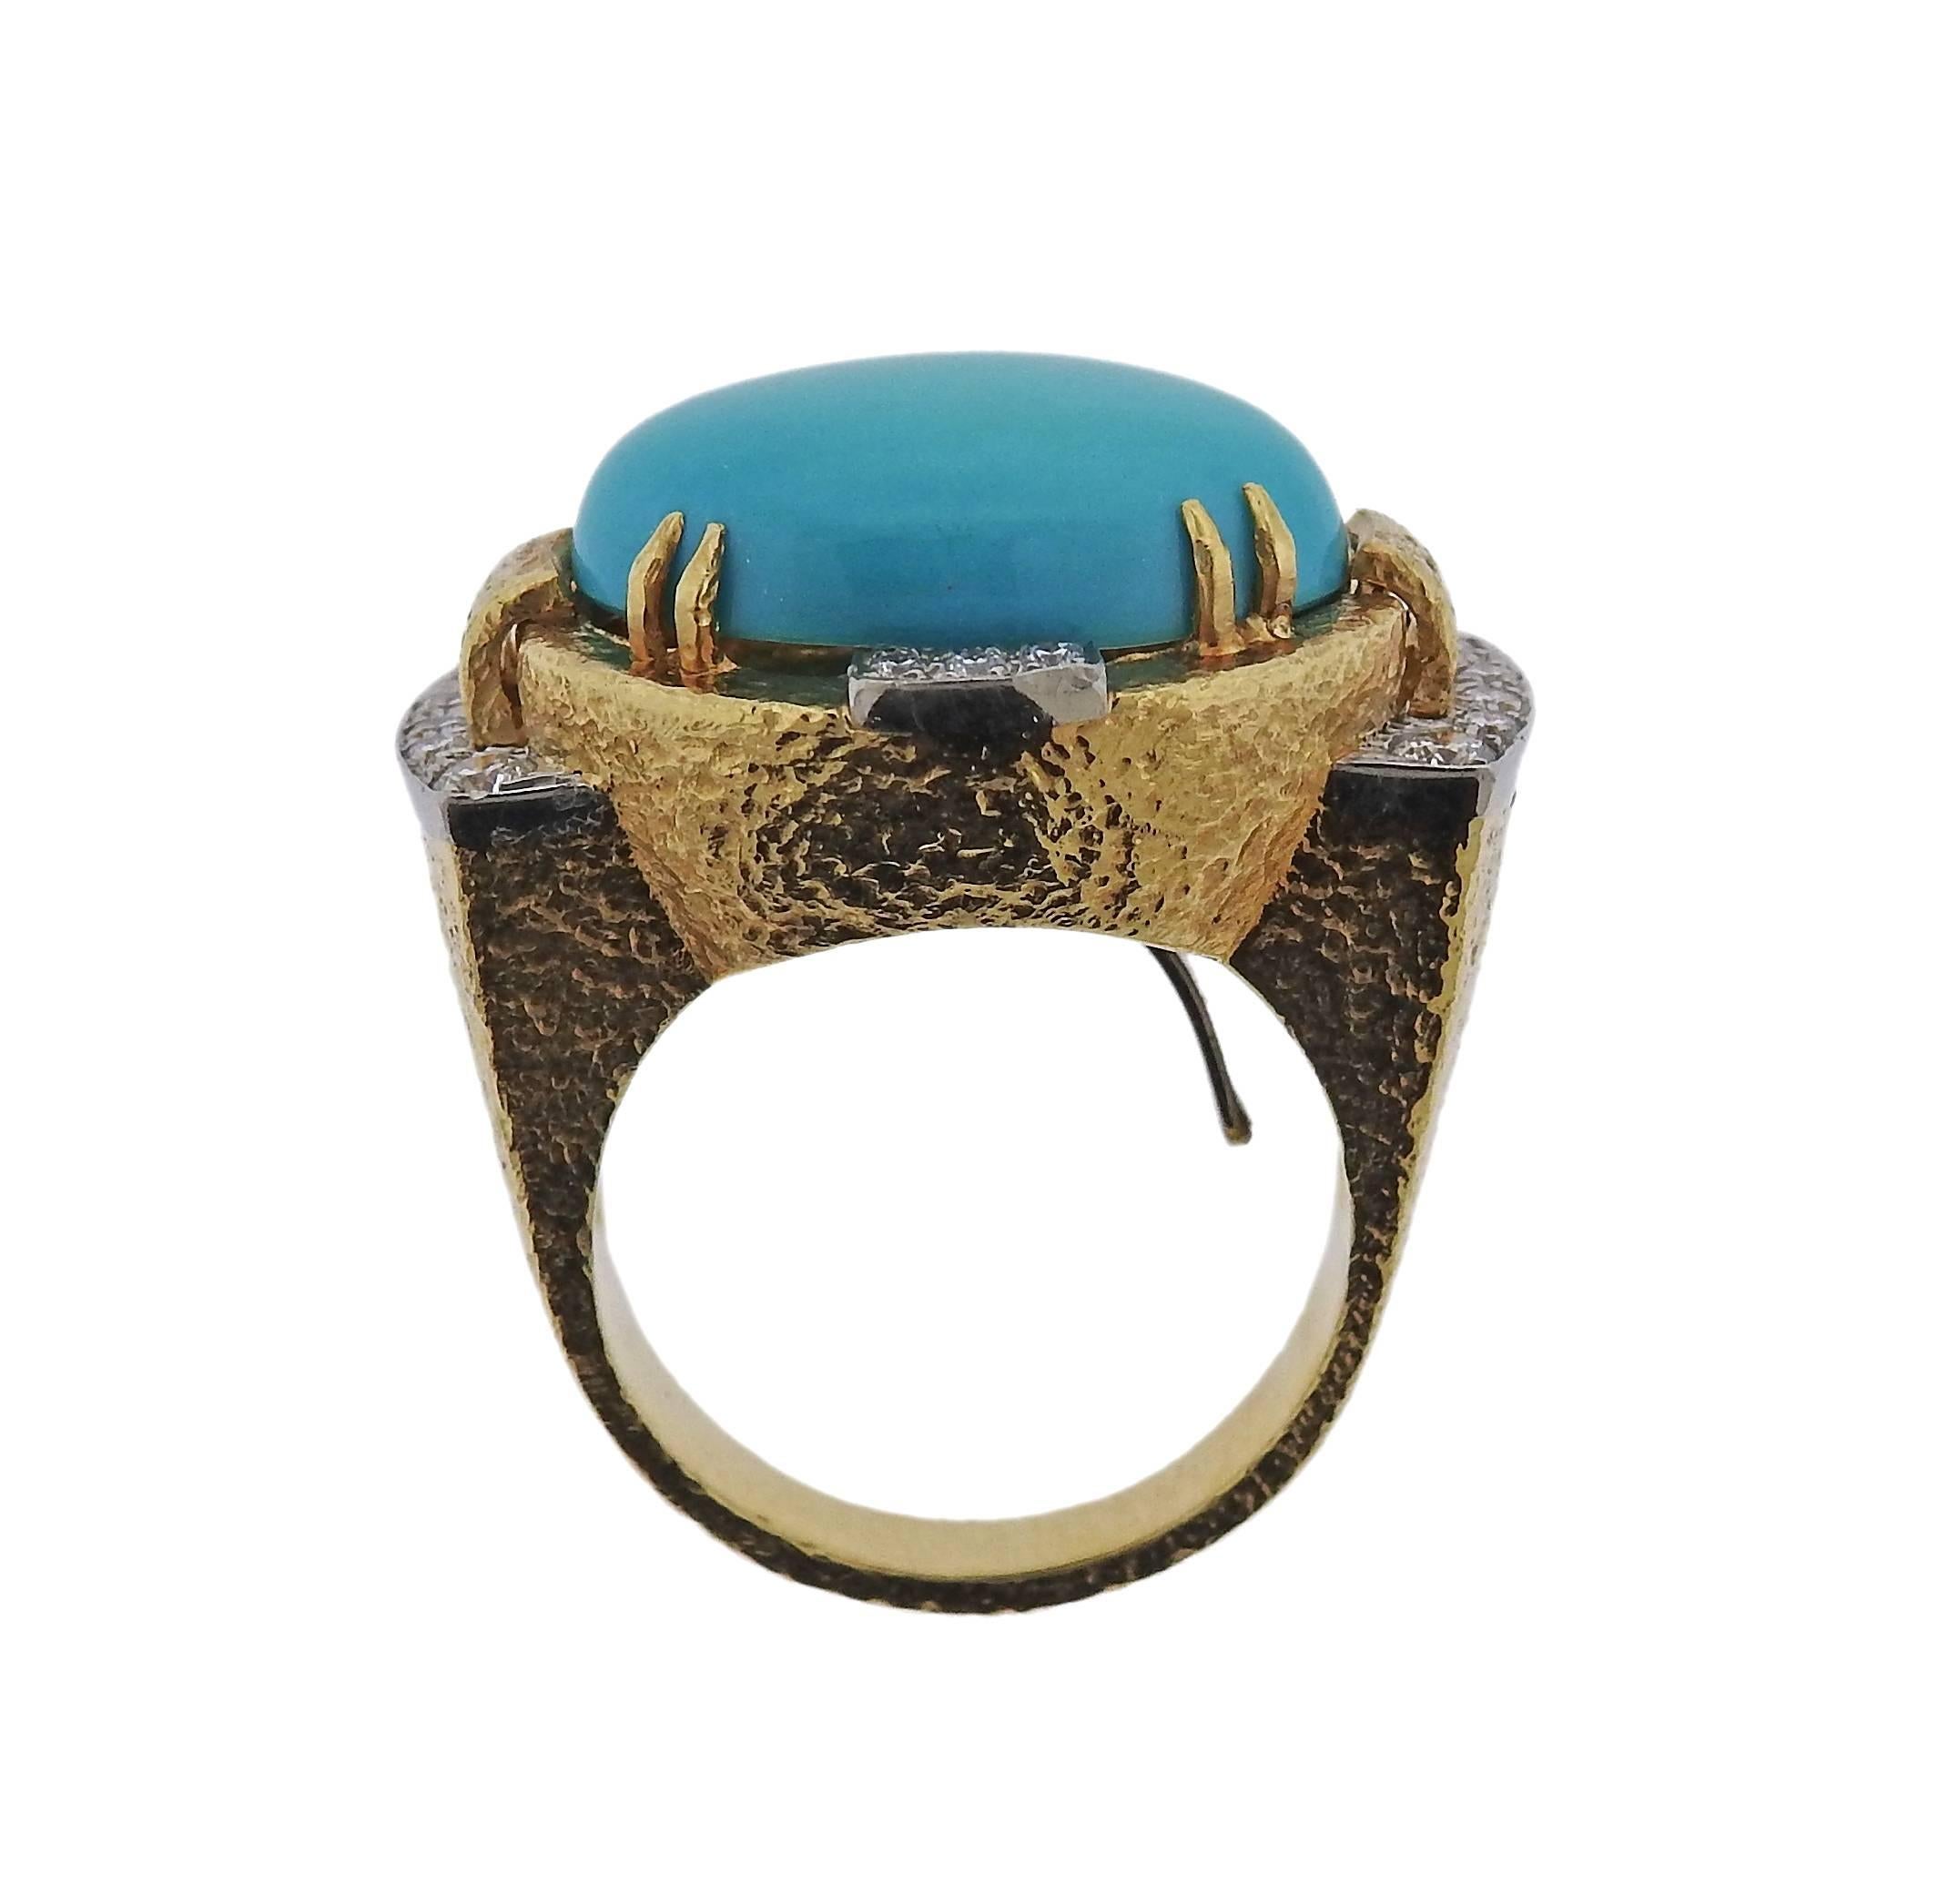 18k gold and platinum cocktail ring, crafted by David Webb, set with 14mm x 19mm  turquoise, surrounded with approx. 0.40ctw in H/VS diamonds. Ring size 9, ring top is 19mm x 27mm. Marked: Webb, 750, 900pt. Weight of the piece - 22.3 grams 